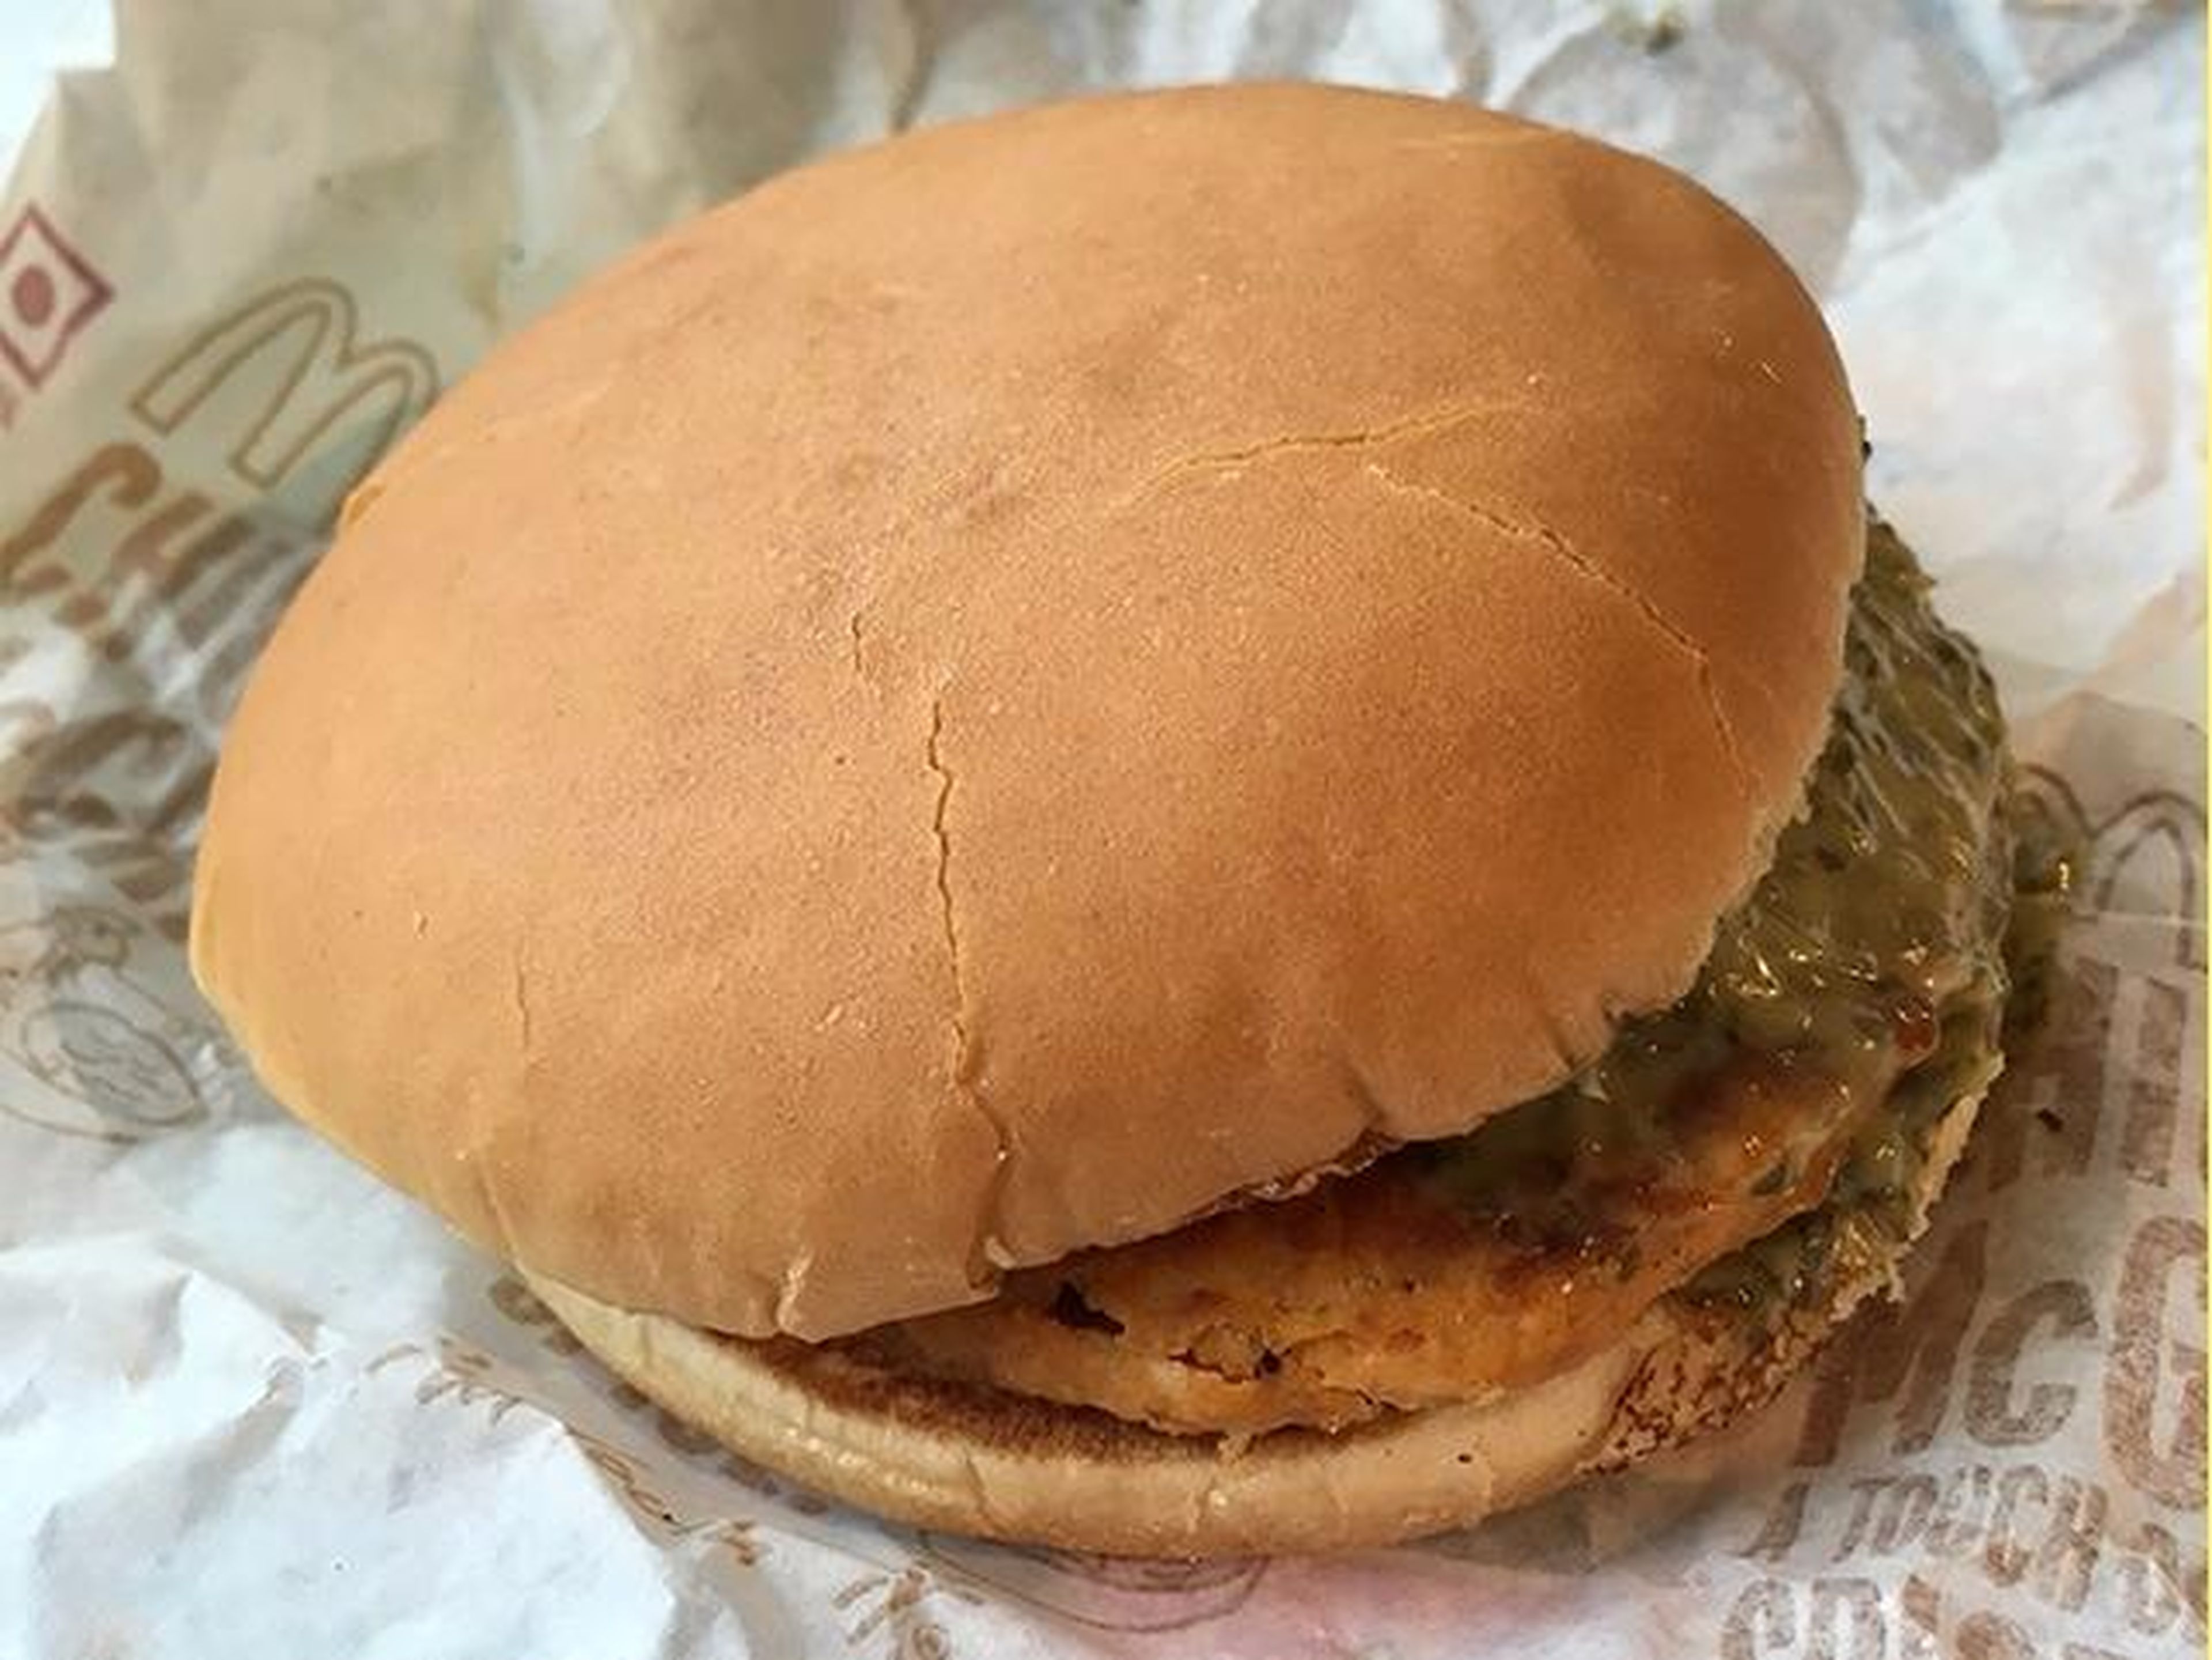 McDonald's has tried to draw inspiration from local Indian tastes and flavors. Adding mint sauce to the Chicken McGrill bun has been one successful attempt at appealing to Indian taste buds.